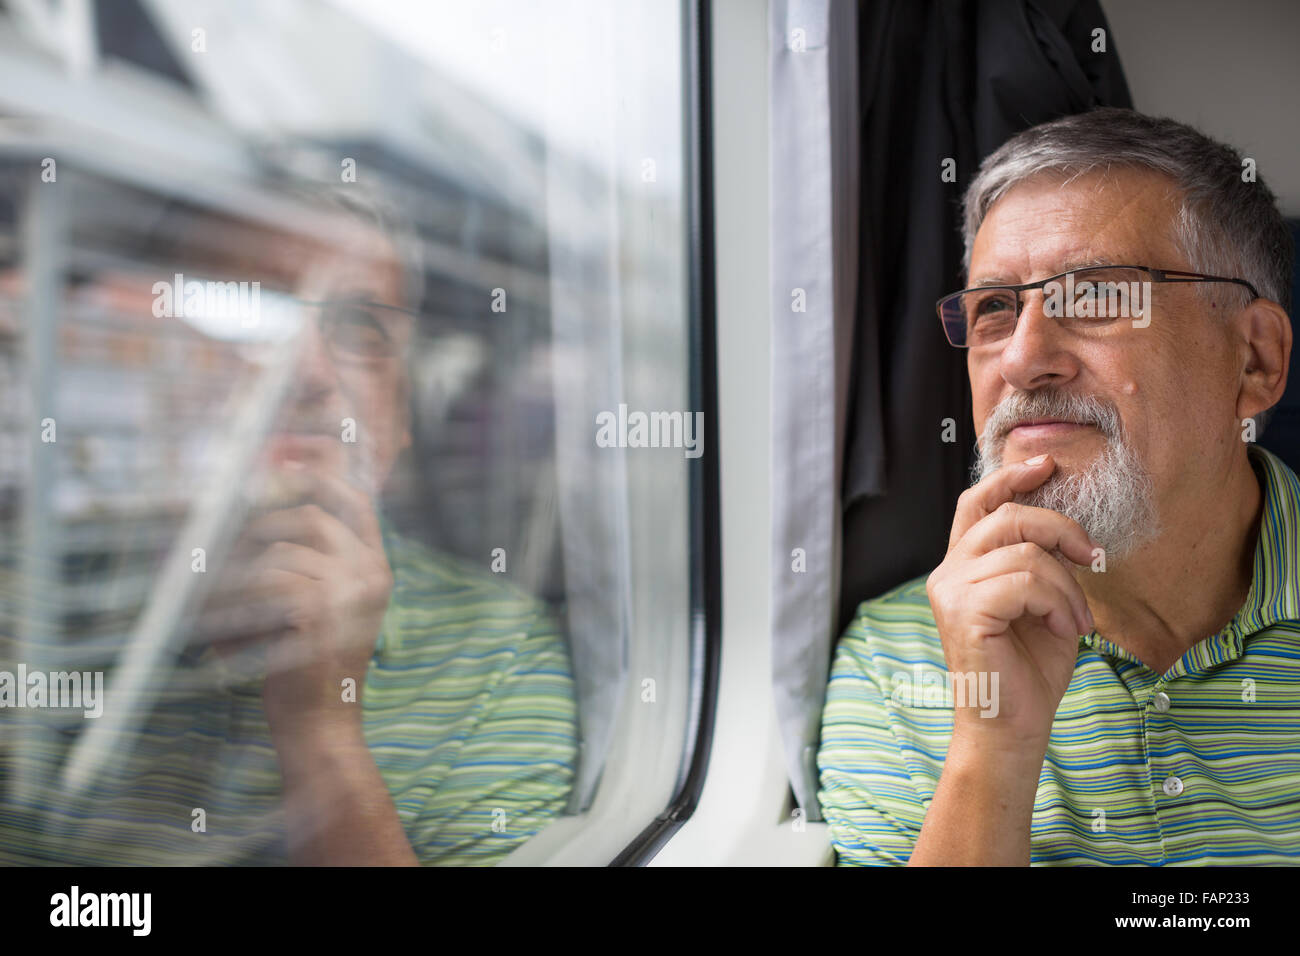 Senior man enjoying a train travel - leaving his car at home, he savours the time spent travelling, looks out of the window, has Stock Photo